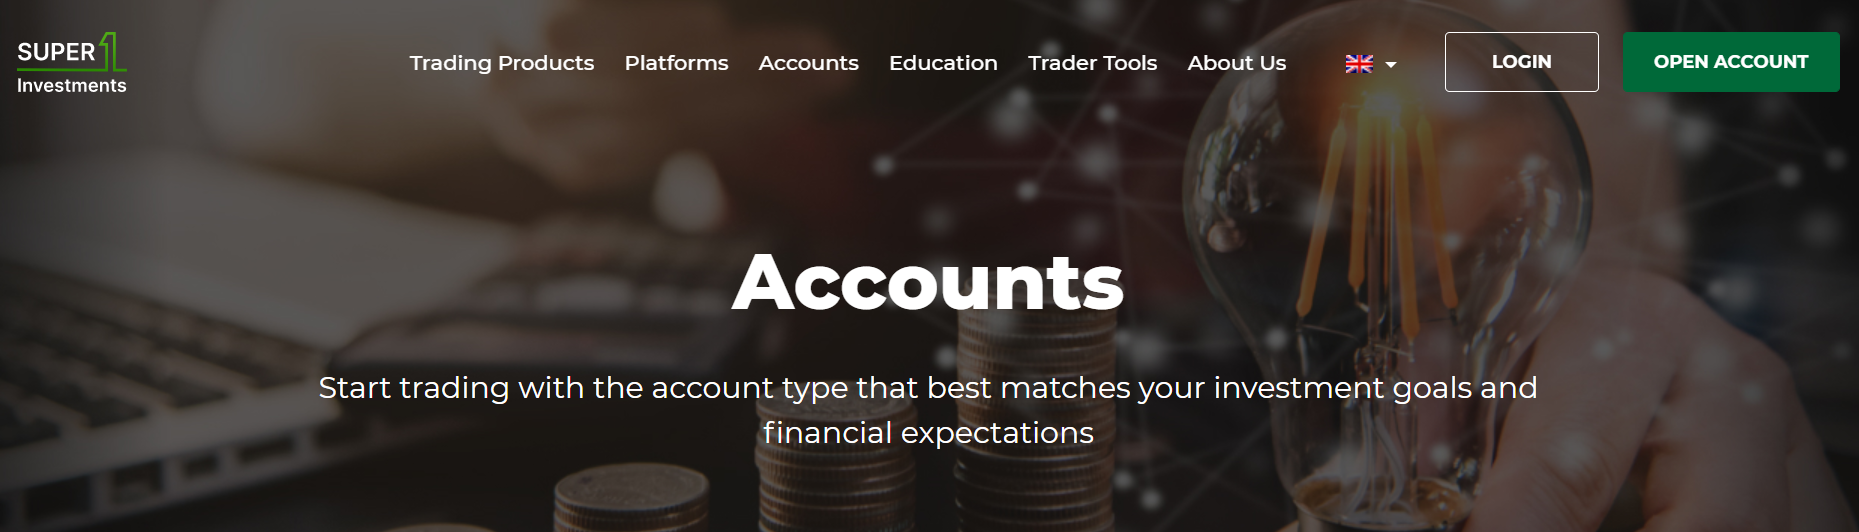 super1investments Account Types